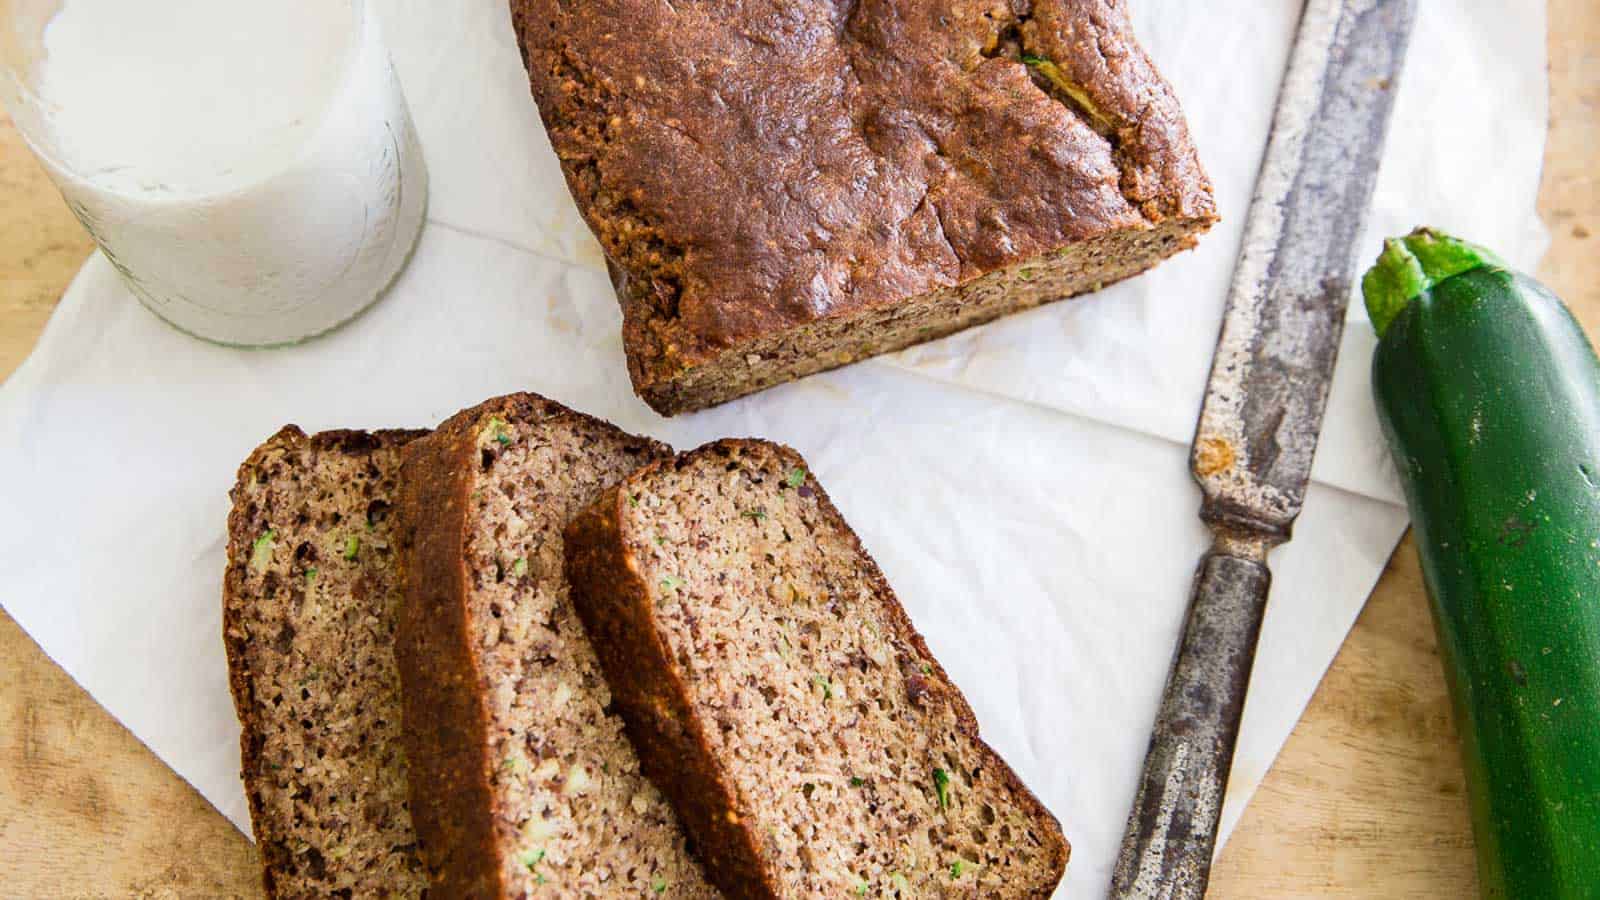 Paleo almond zucchini bread cut into slices with jug of milk, knife and zucchini to the side.